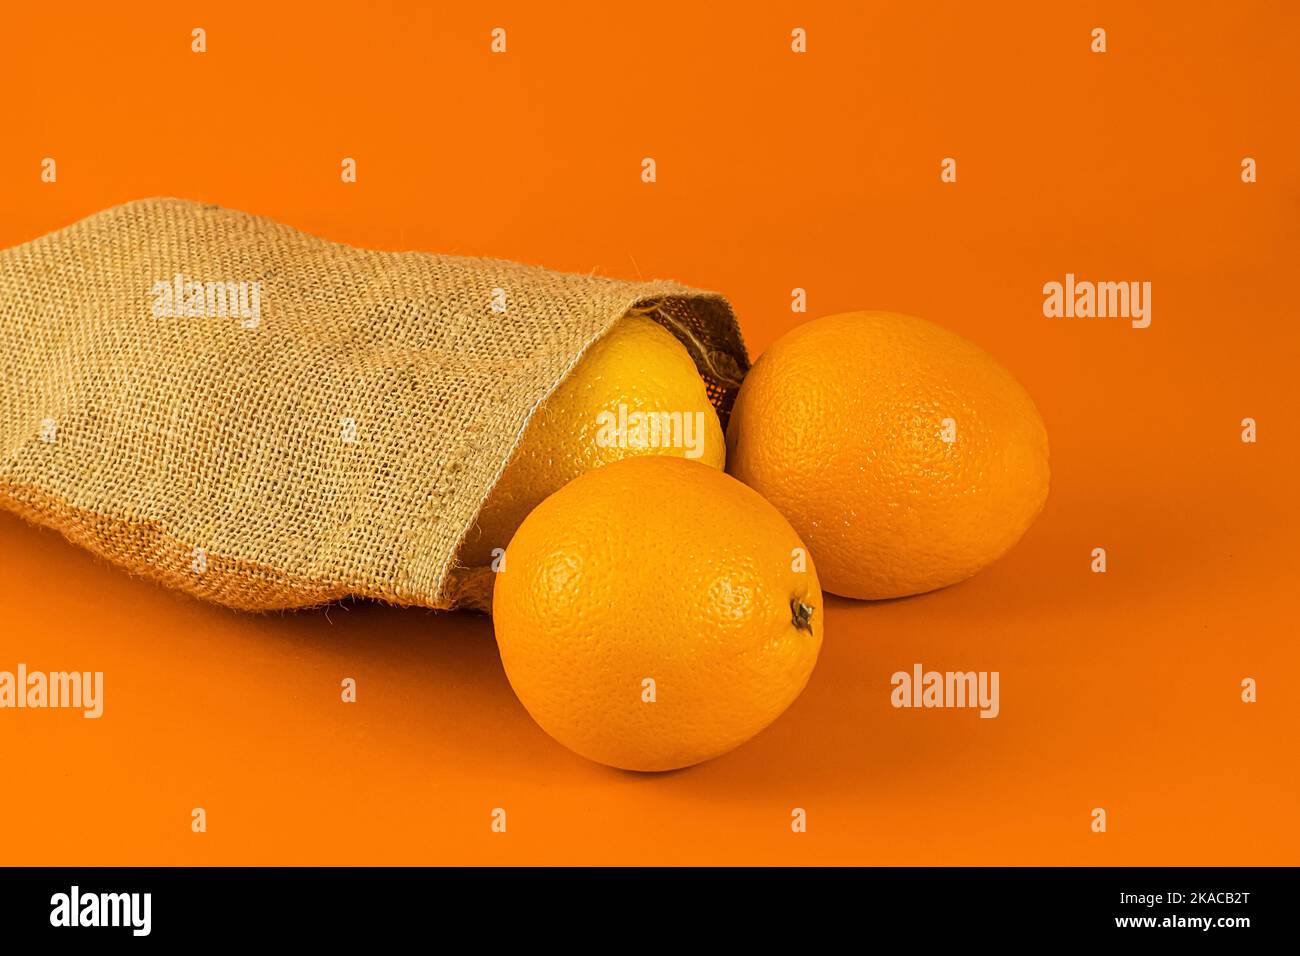 Oranges in a natural burlap bag on an orange background Stock Photo - Alamy